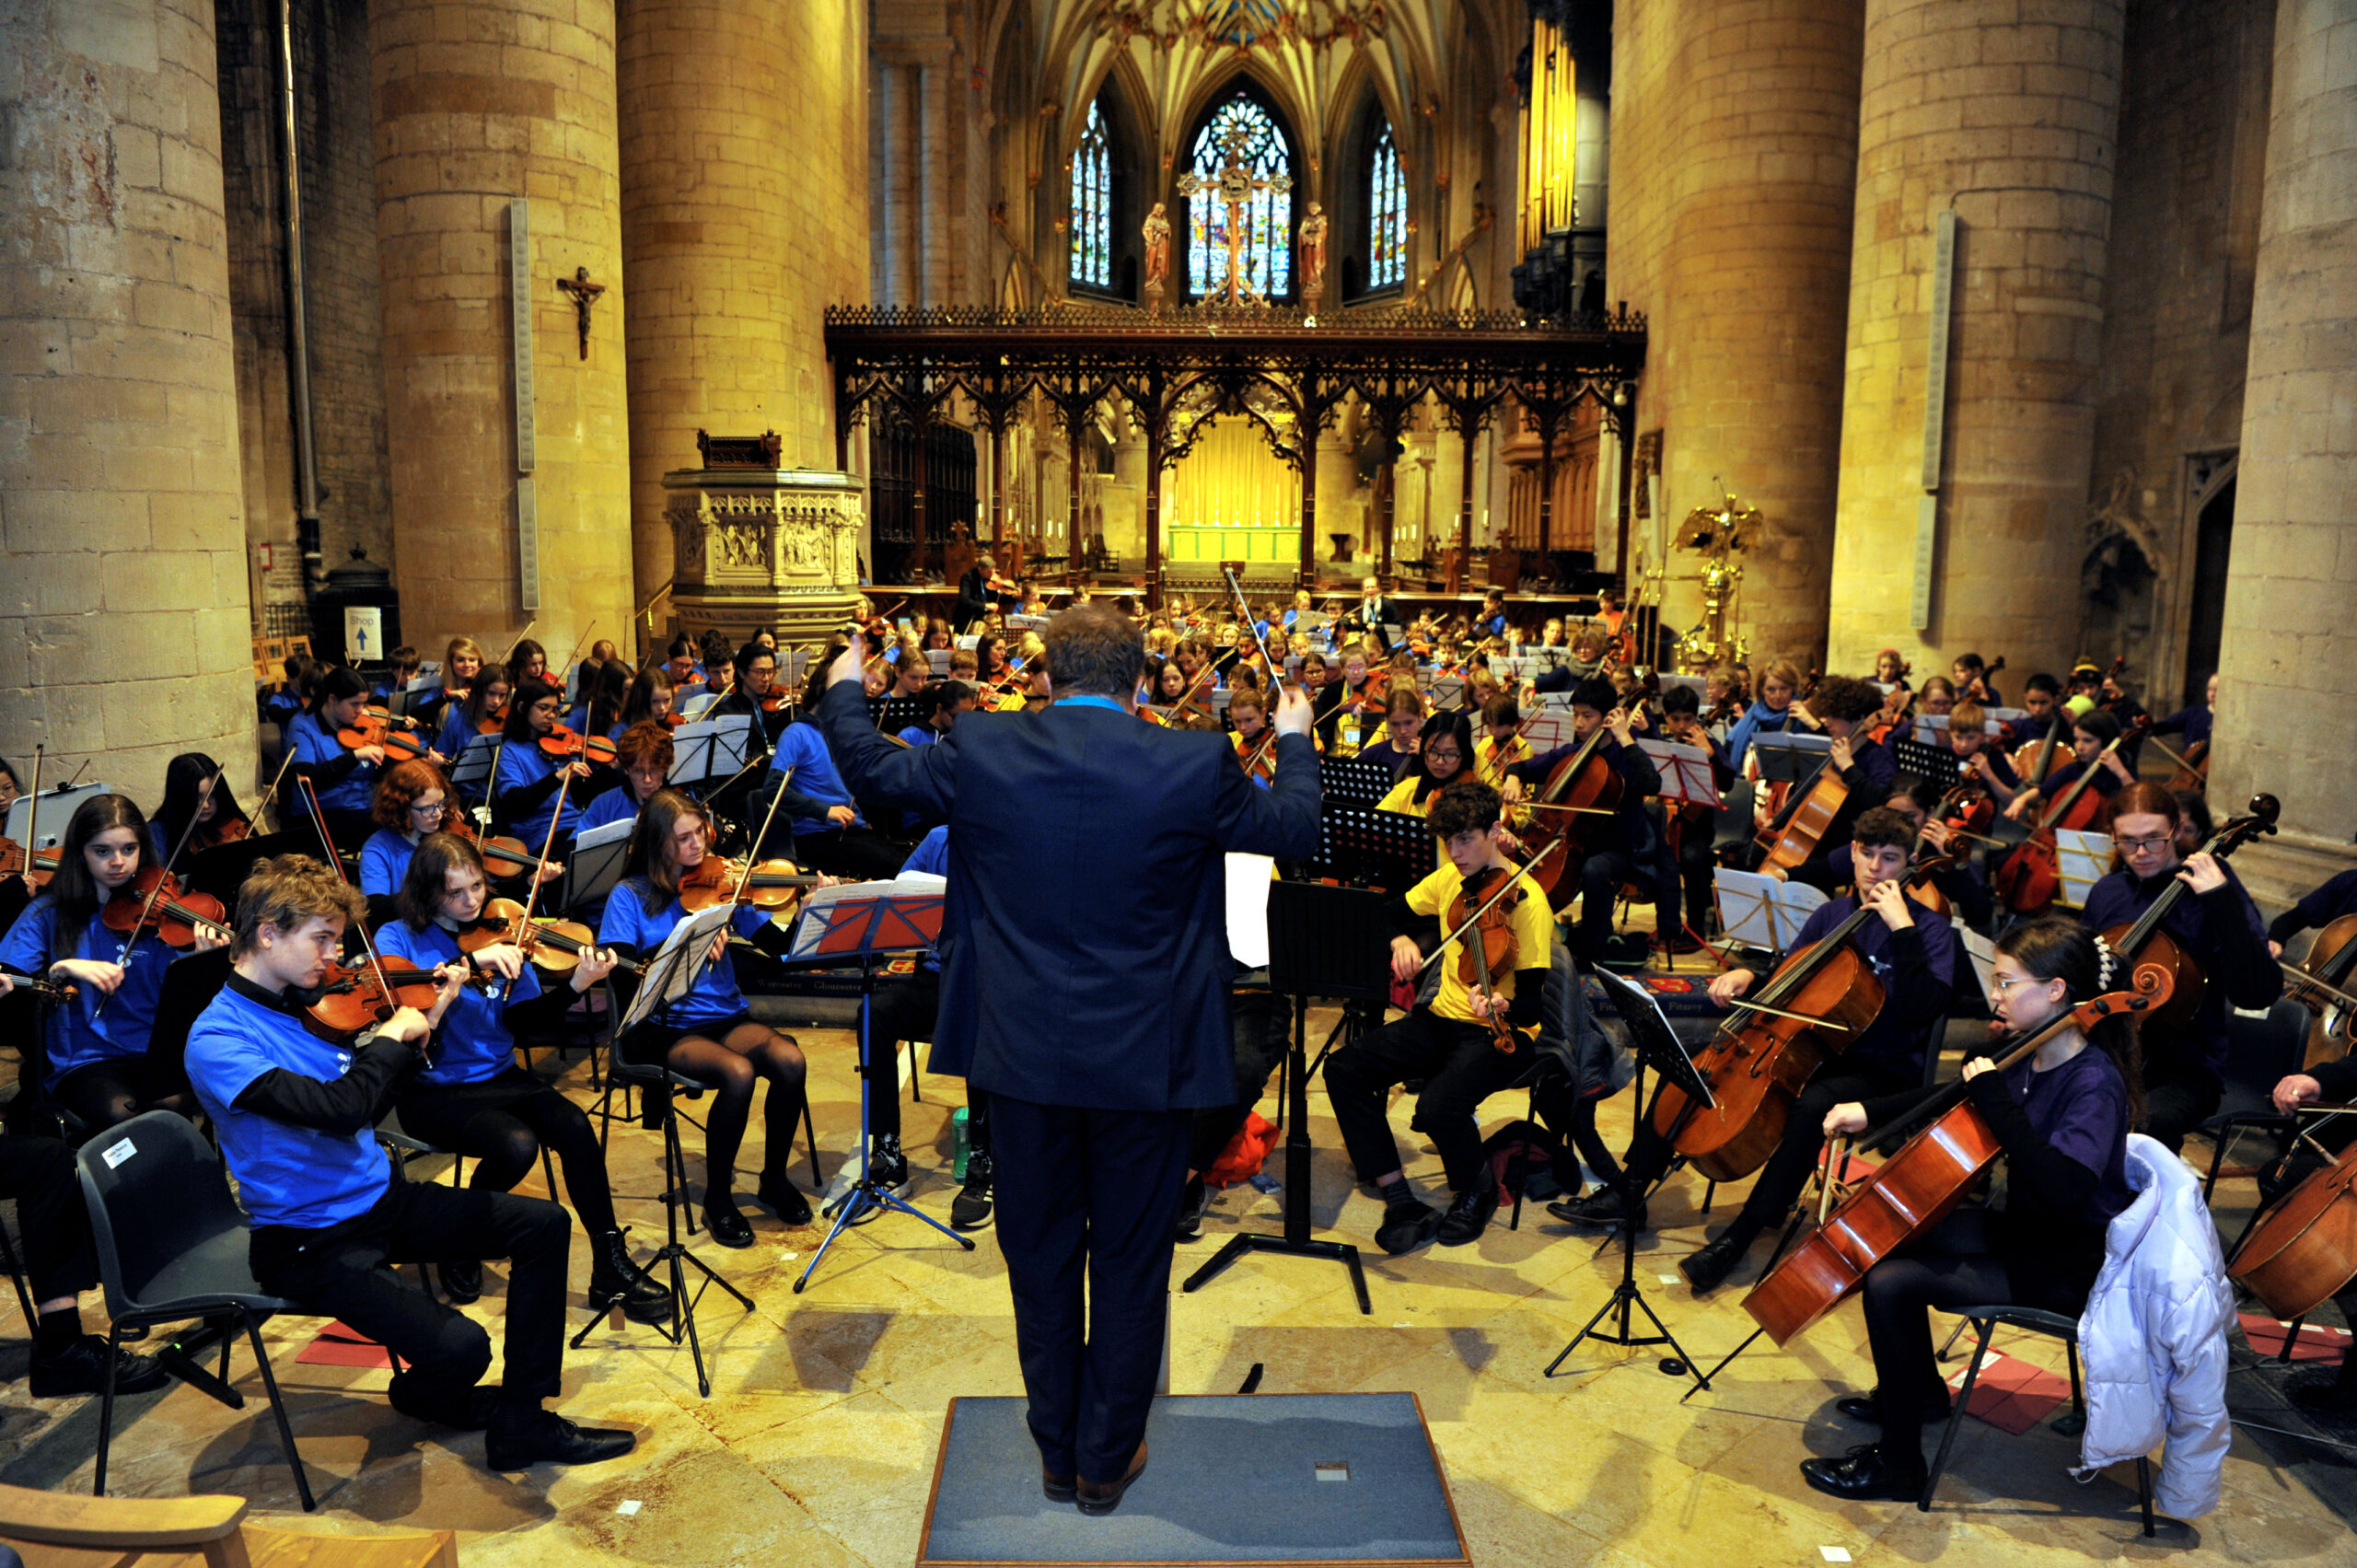 photo of a conductor standing in front of a strings orchestra of young people in Tewkesbury Abbey